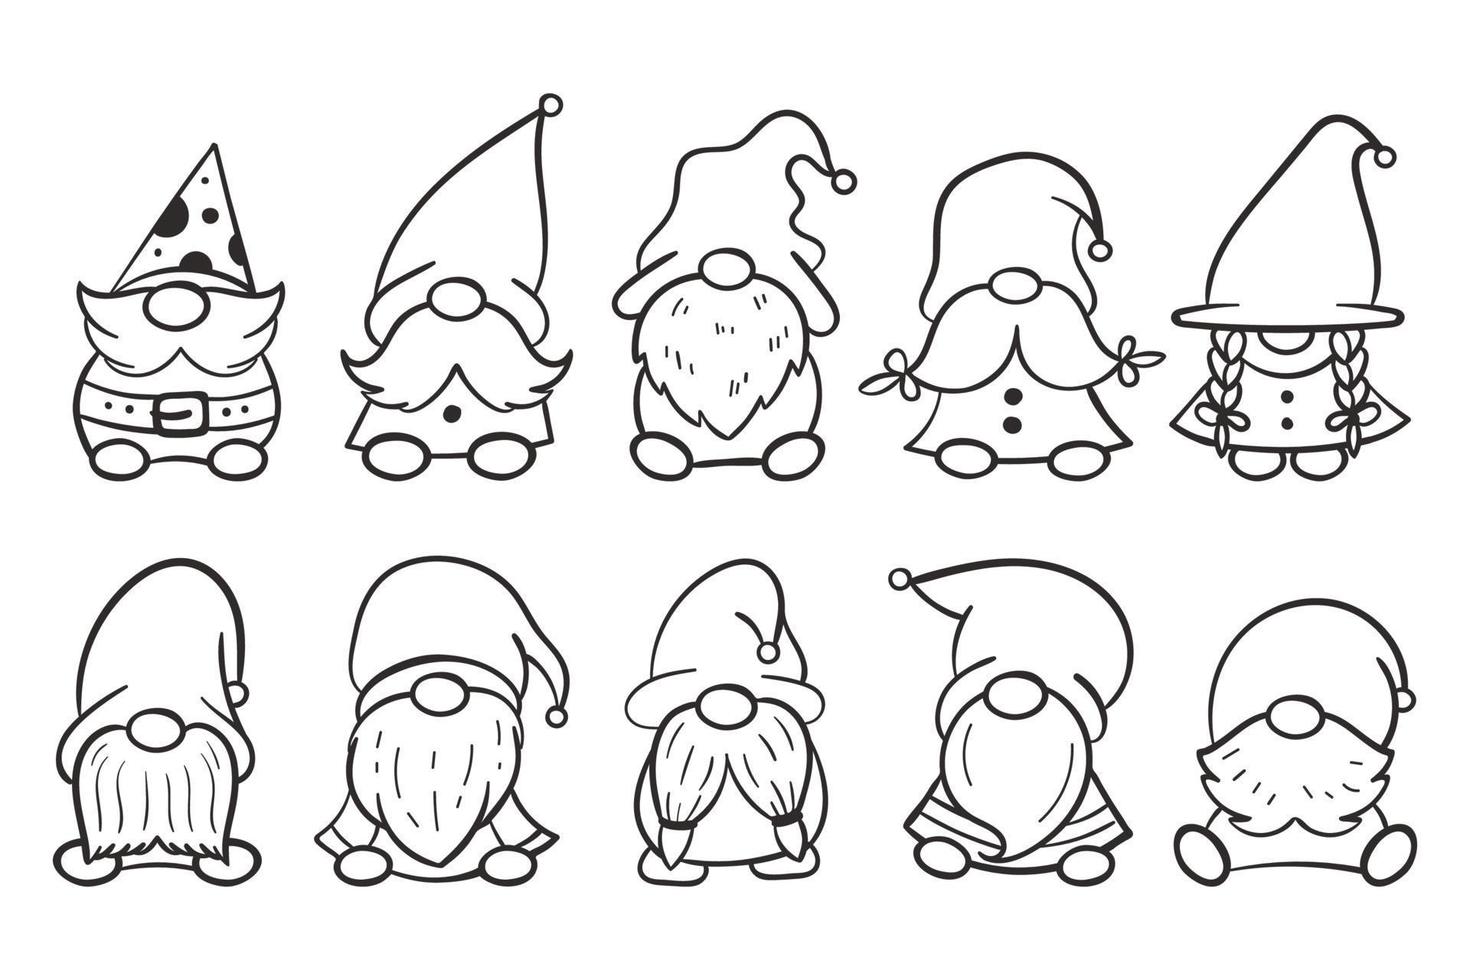 Line art Christmas gnomes design for coloring book. vector